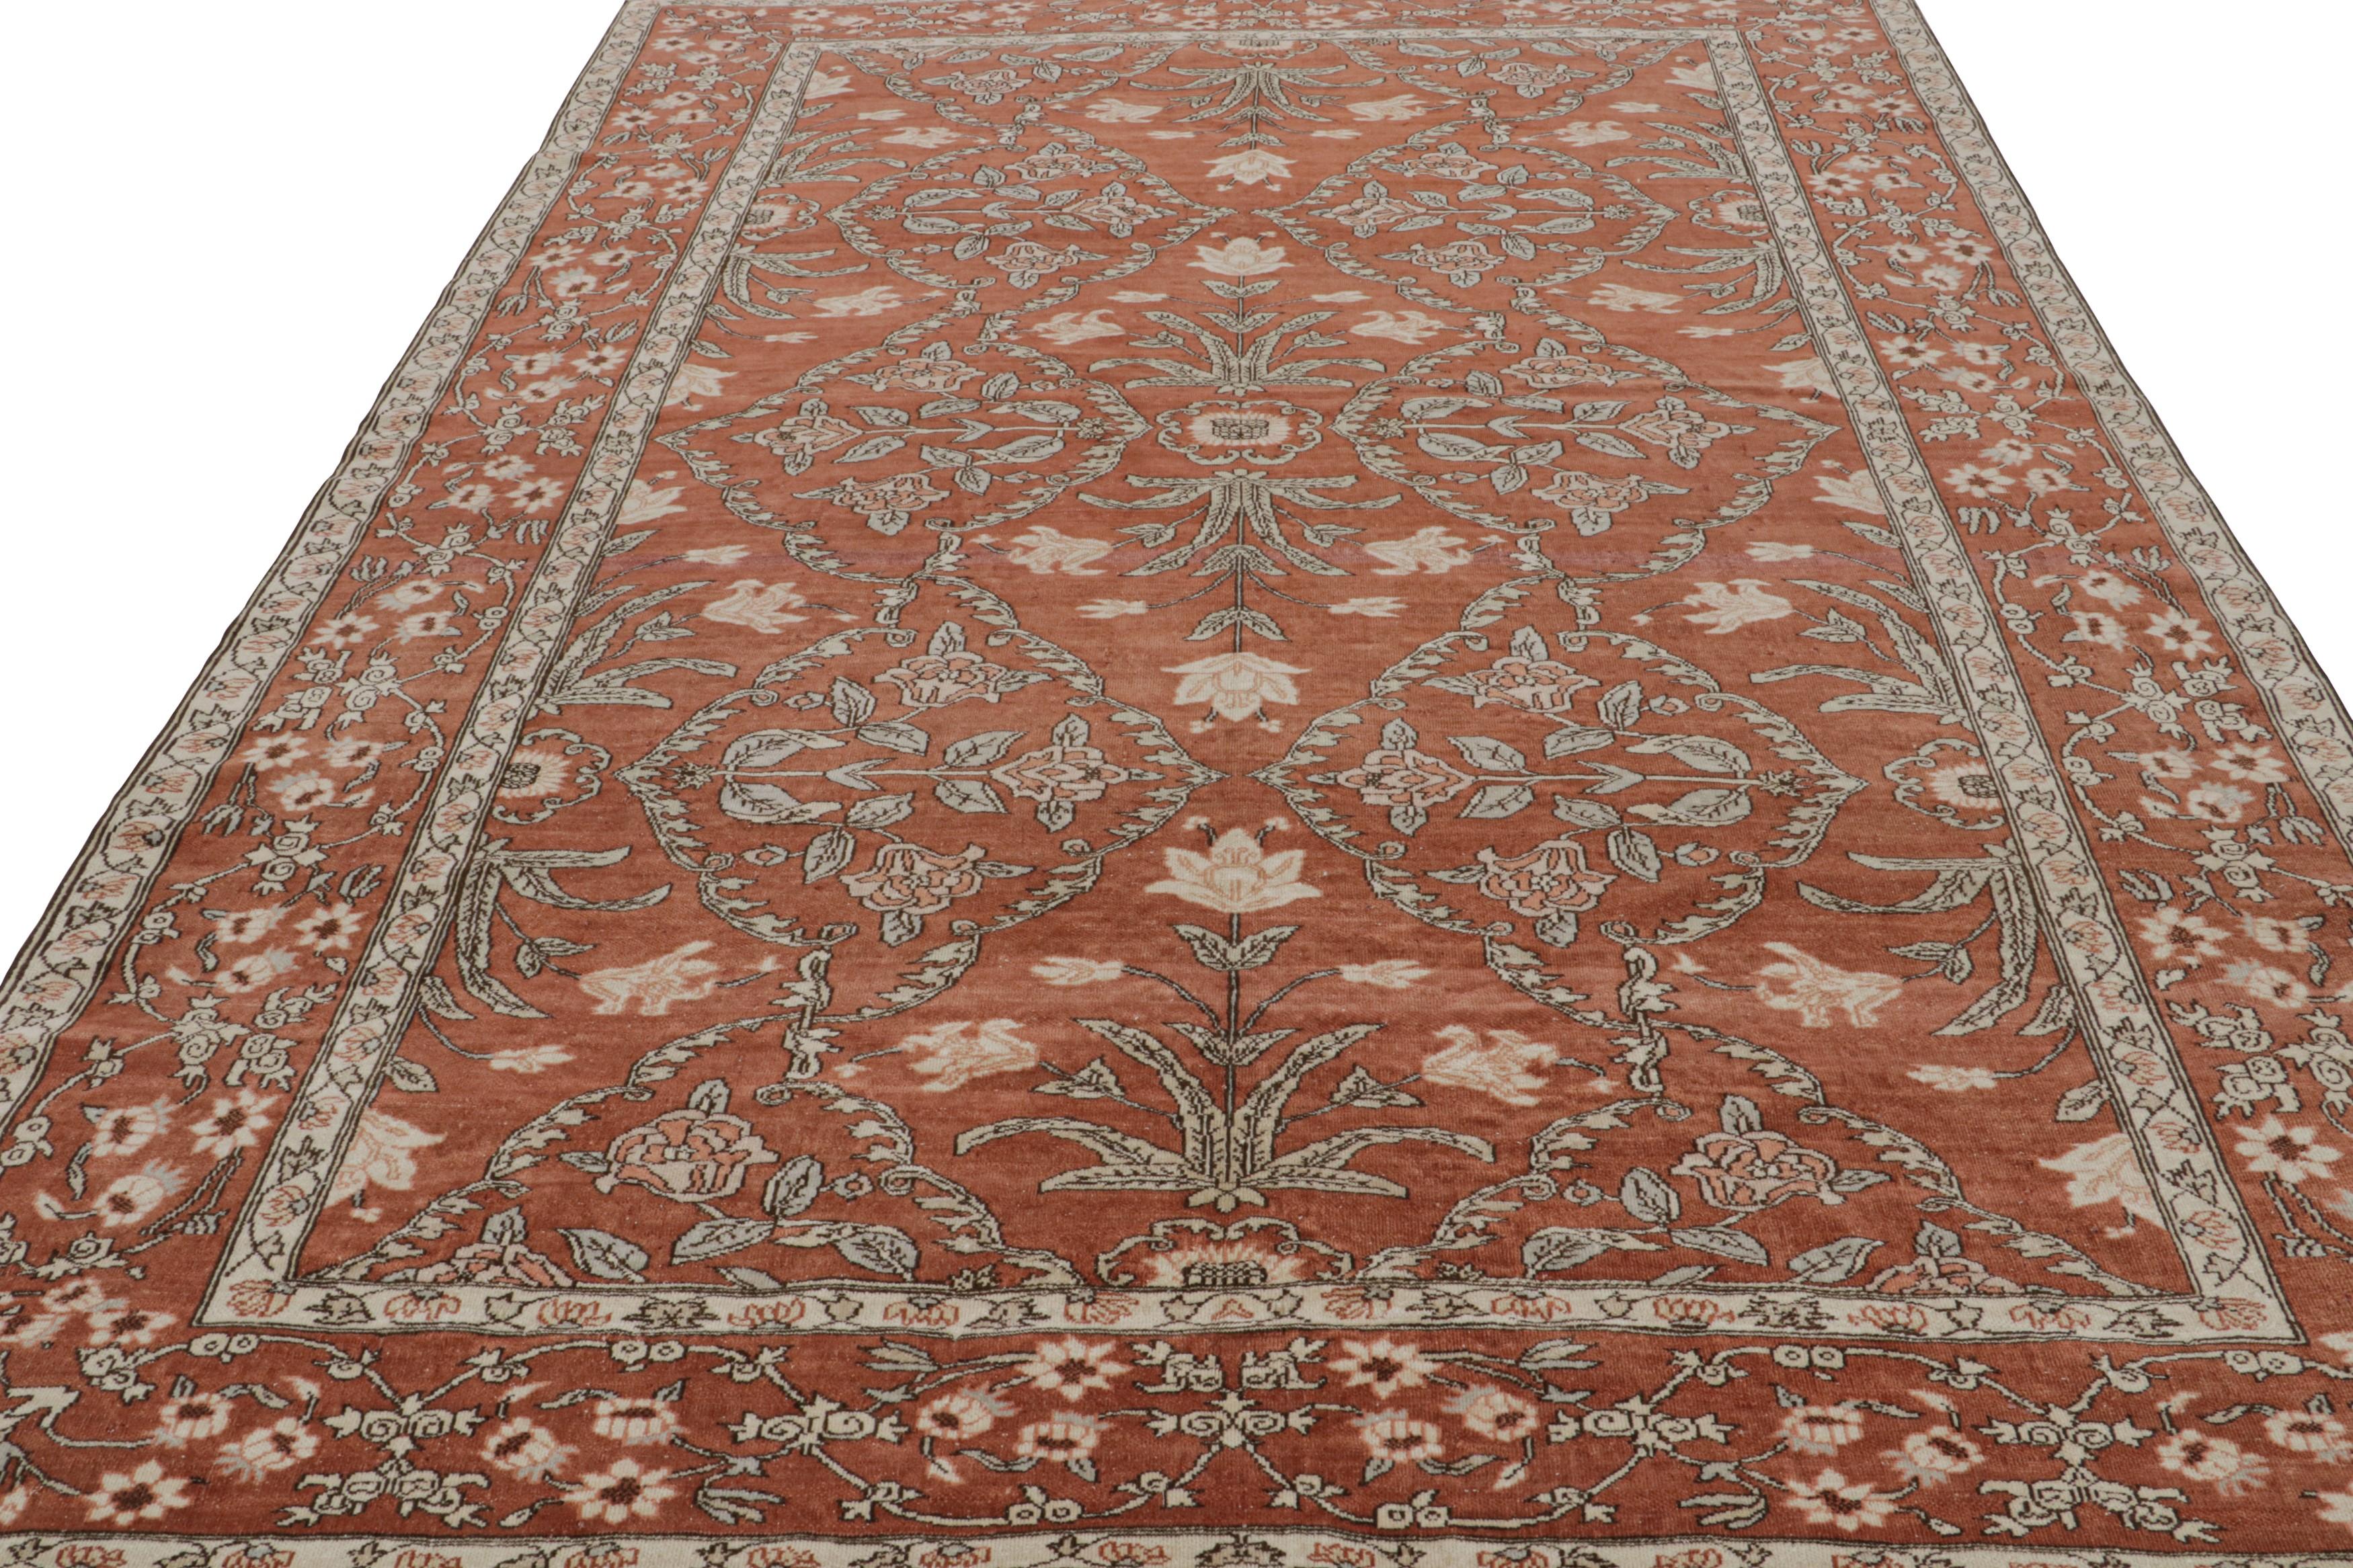 Egyptian Rug & Kilim’s 17th Century Mogul Style Rug in Red with Beige Floral Patterns For Sale